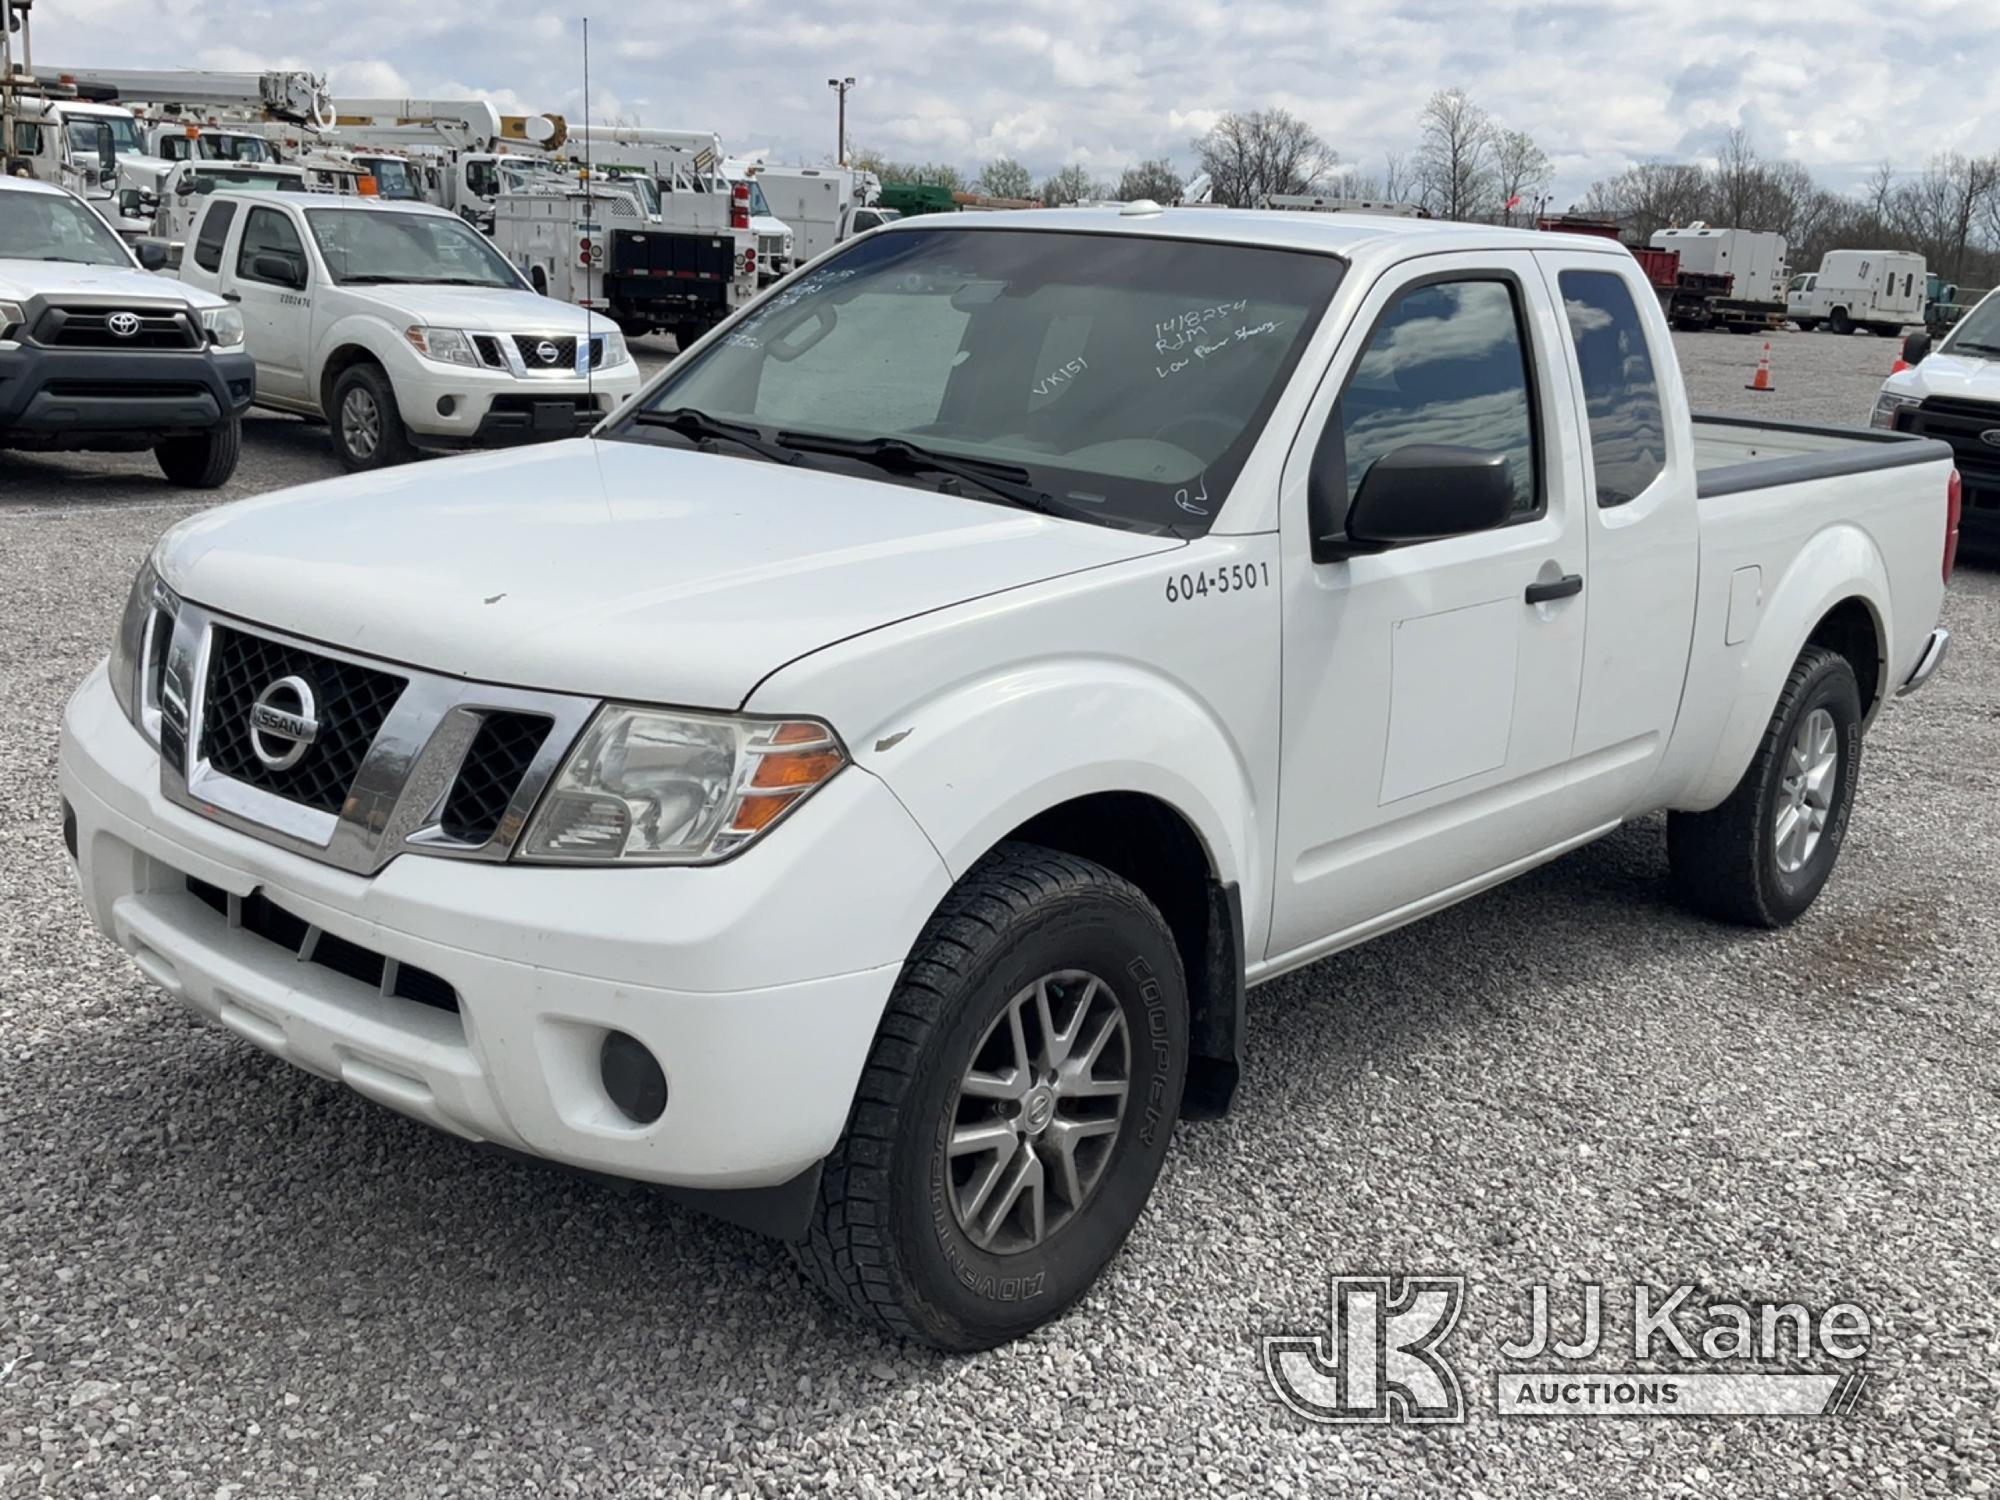 (Verona, KY) 2015 Nissan Frontier 4x4 Extended-Cab Pickup Truck Runs & Moves) (Low Power Steering